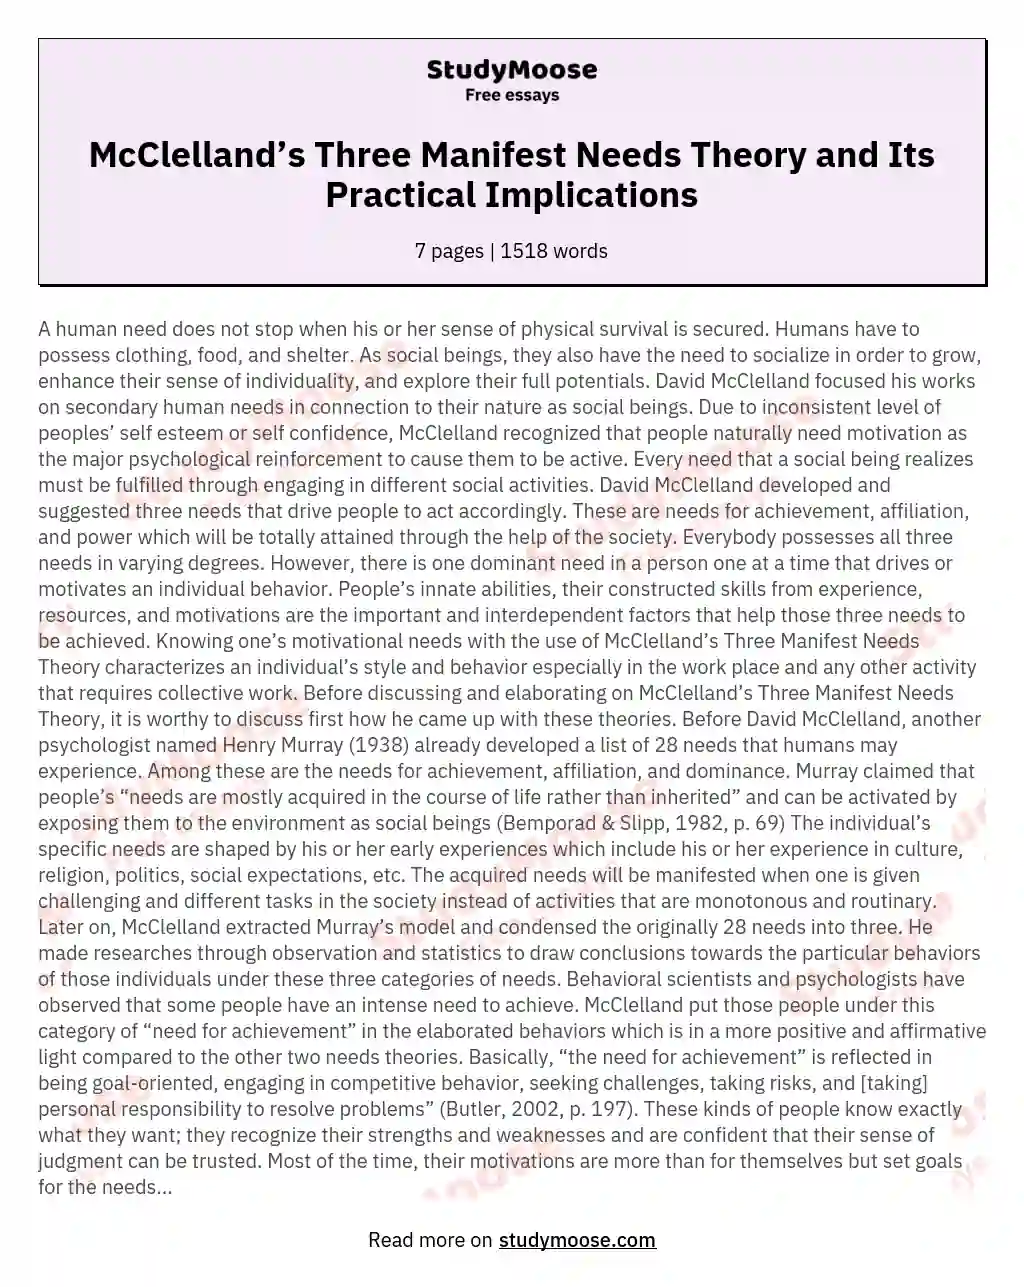 McClelland’s Three Manifest Needs Theory and Its Practical Implications essay